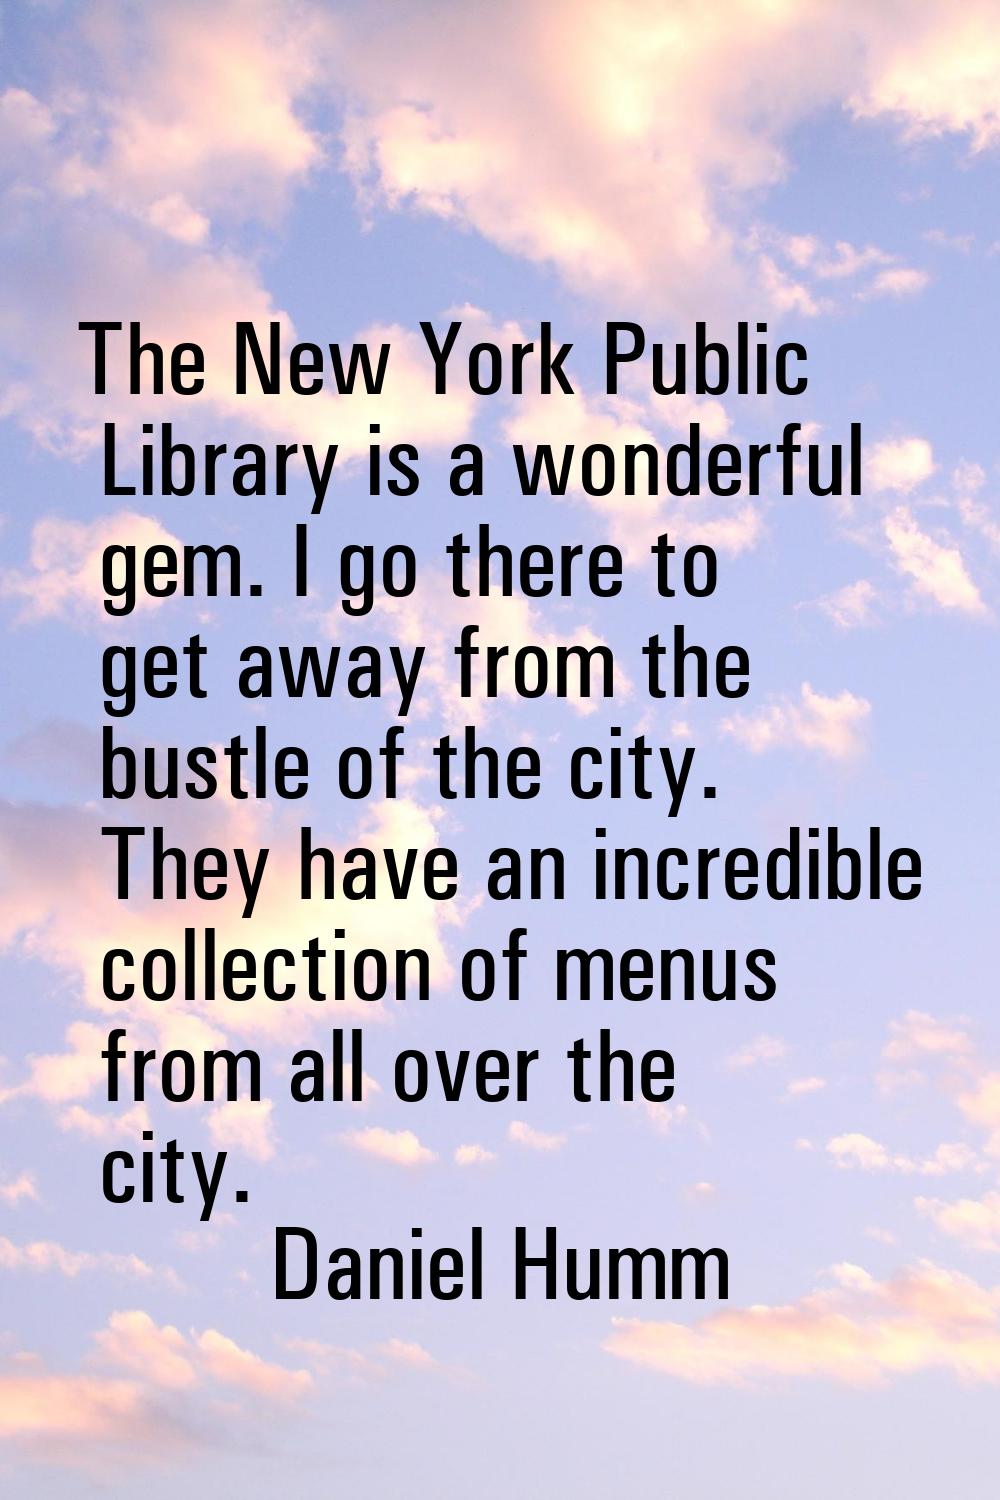 The New York Public Library is a wonderful gem. I go there to get away from the bustle of the city.